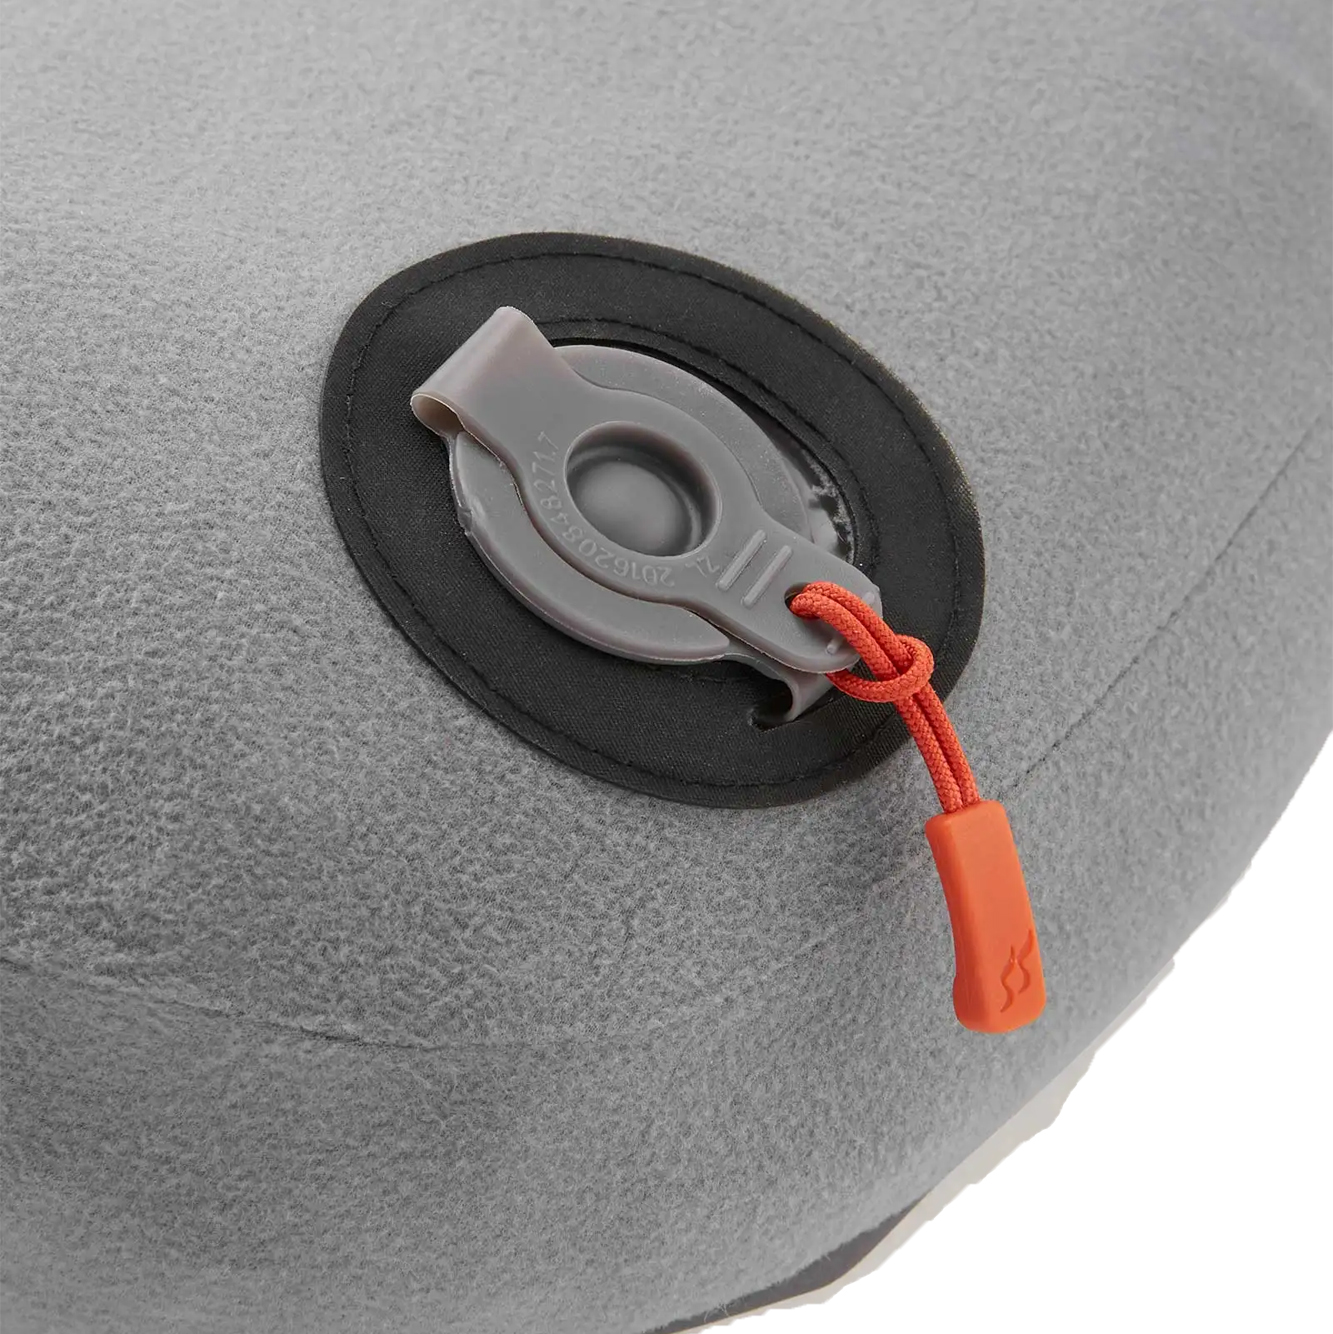 Rab Stratosphere Inflatable Camping Pillow